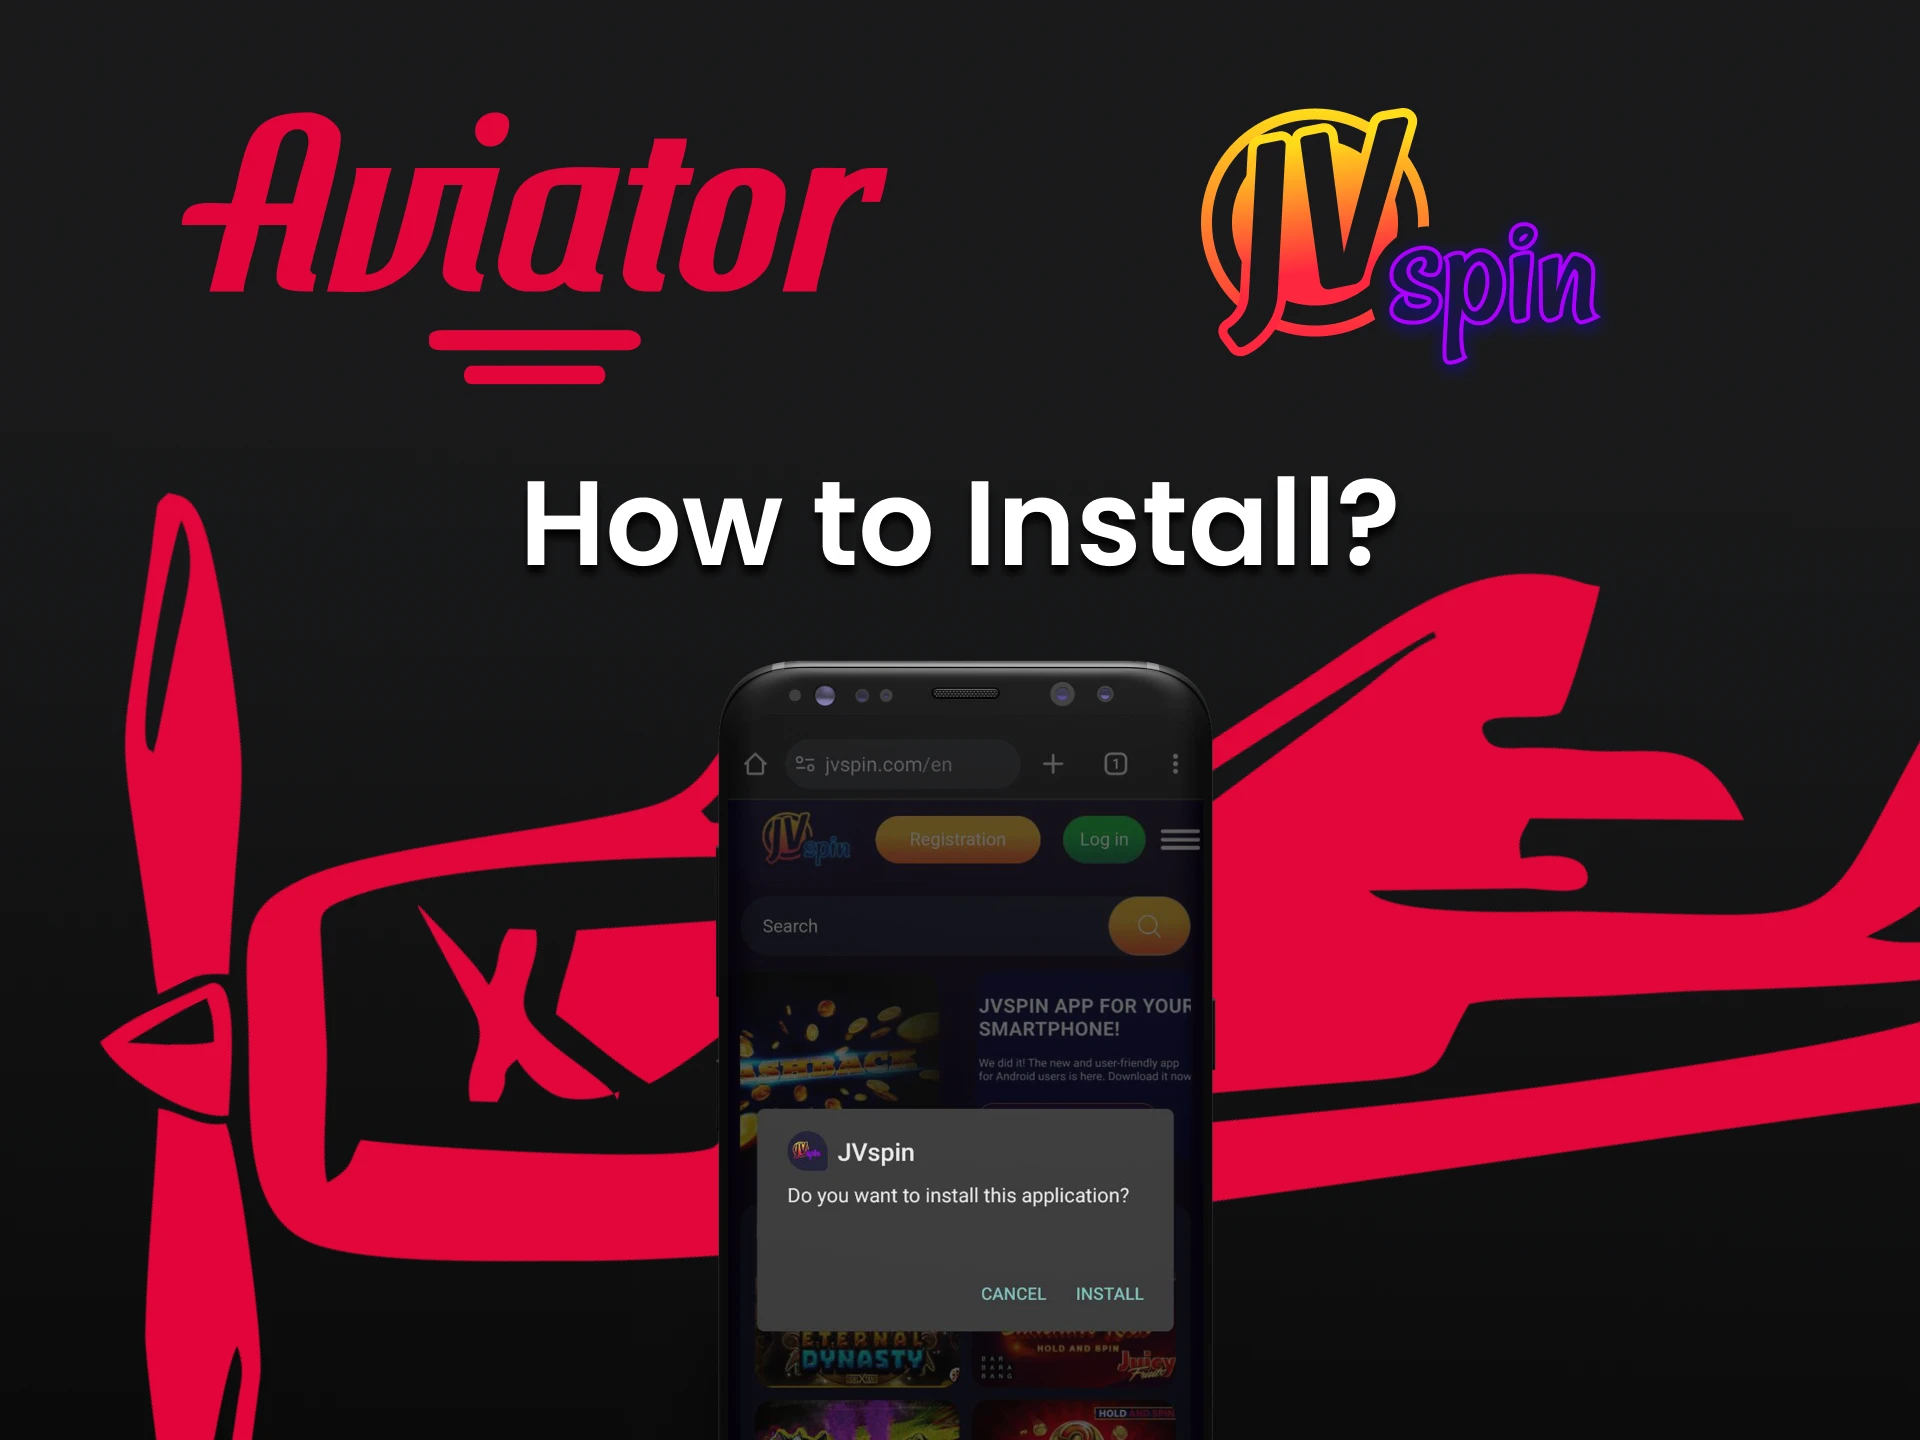 We will tell you how to install the JV Slot application to play Aviator.